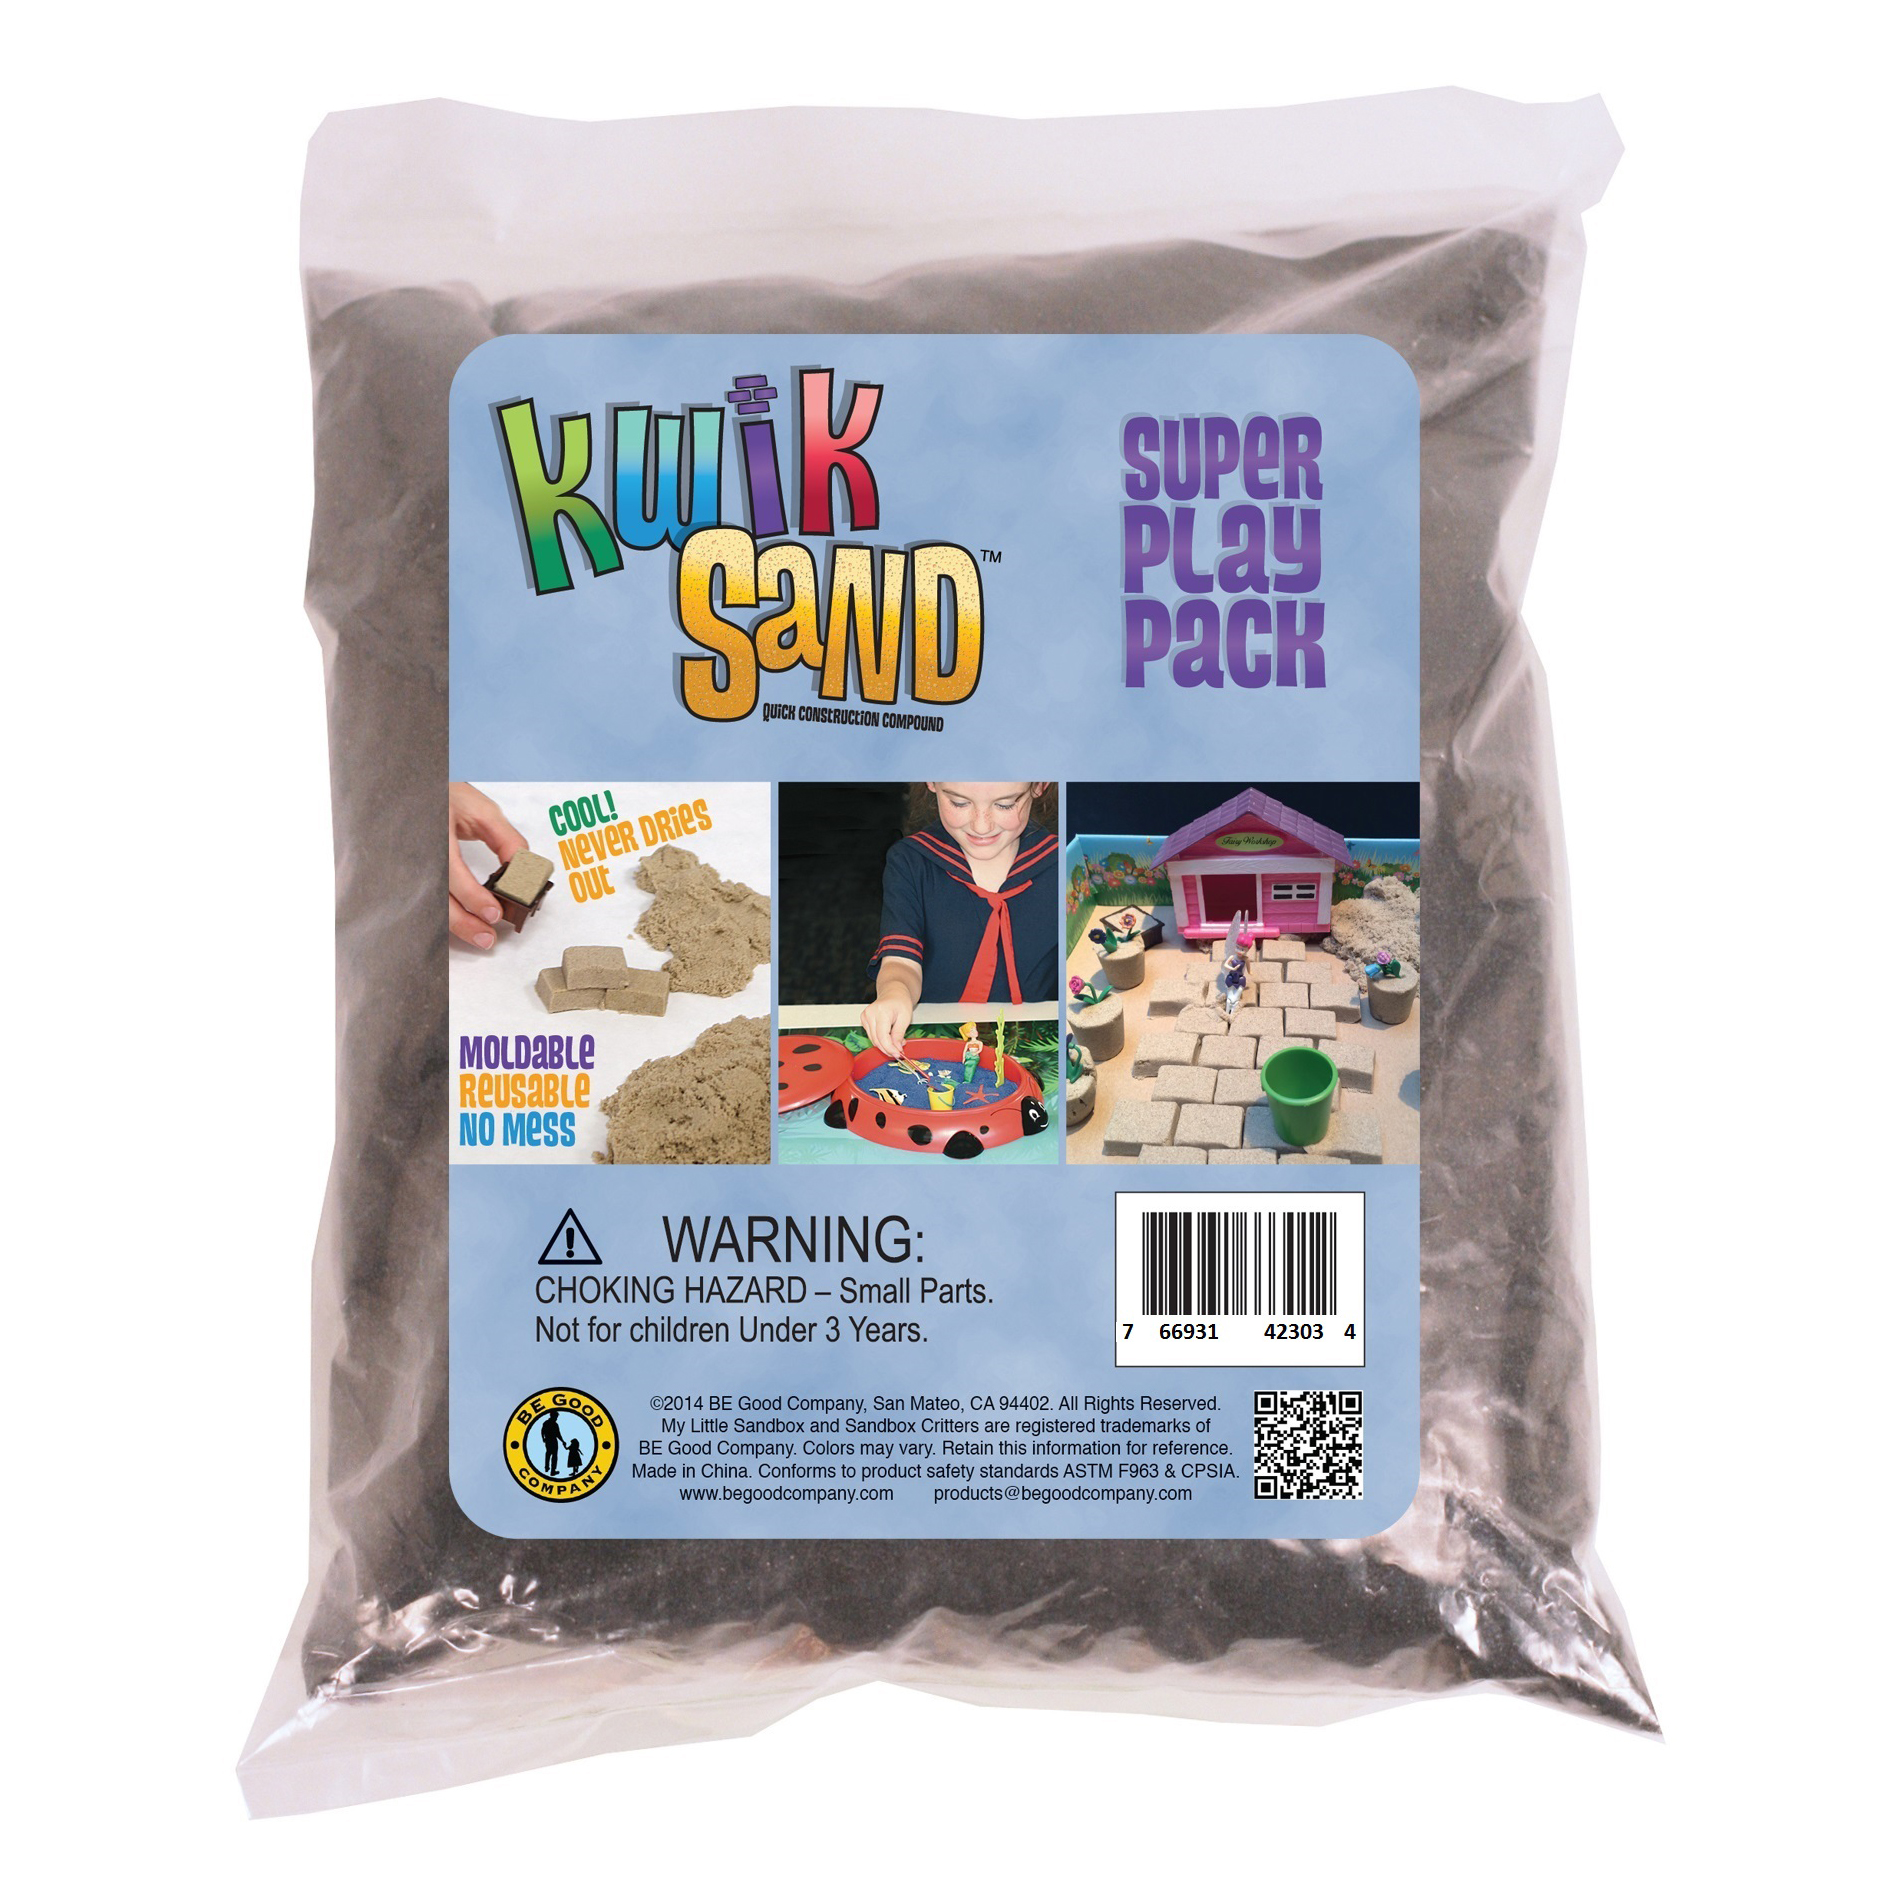 Be Good Co KwikSand Refill Pack - Black